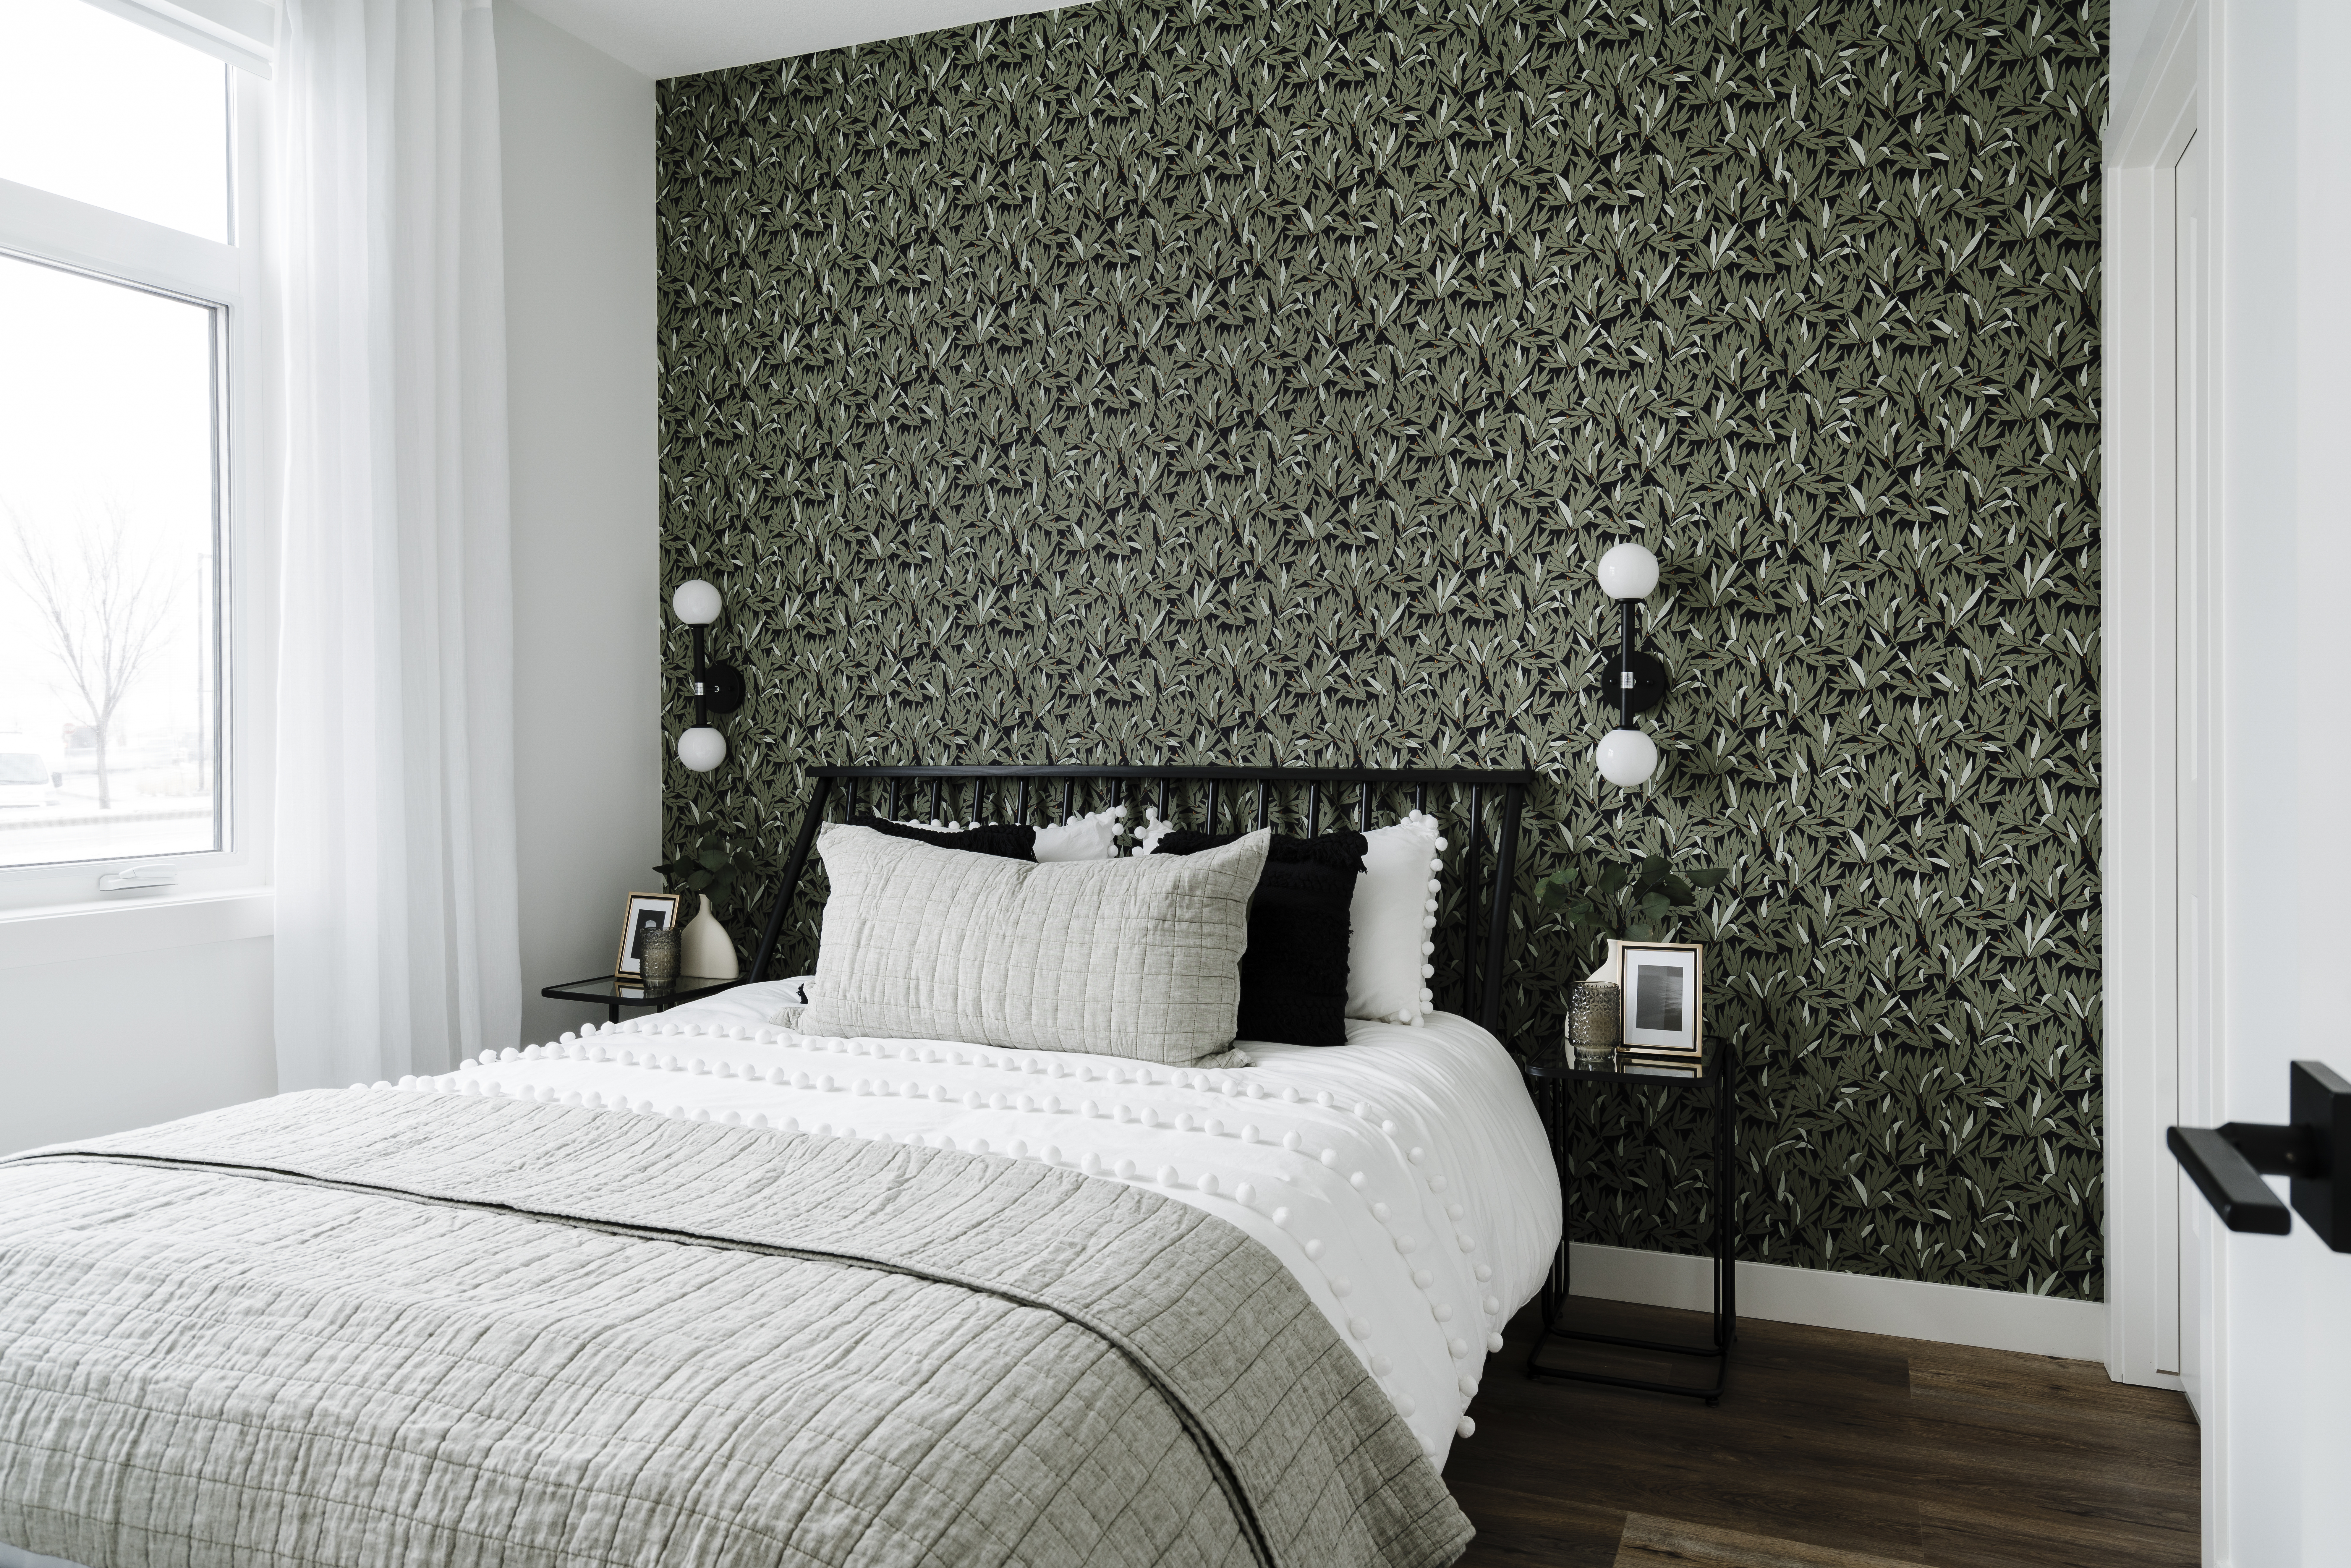 Bedroom with green patterned wallpaper, hardwood floors, and modern wall sconces.